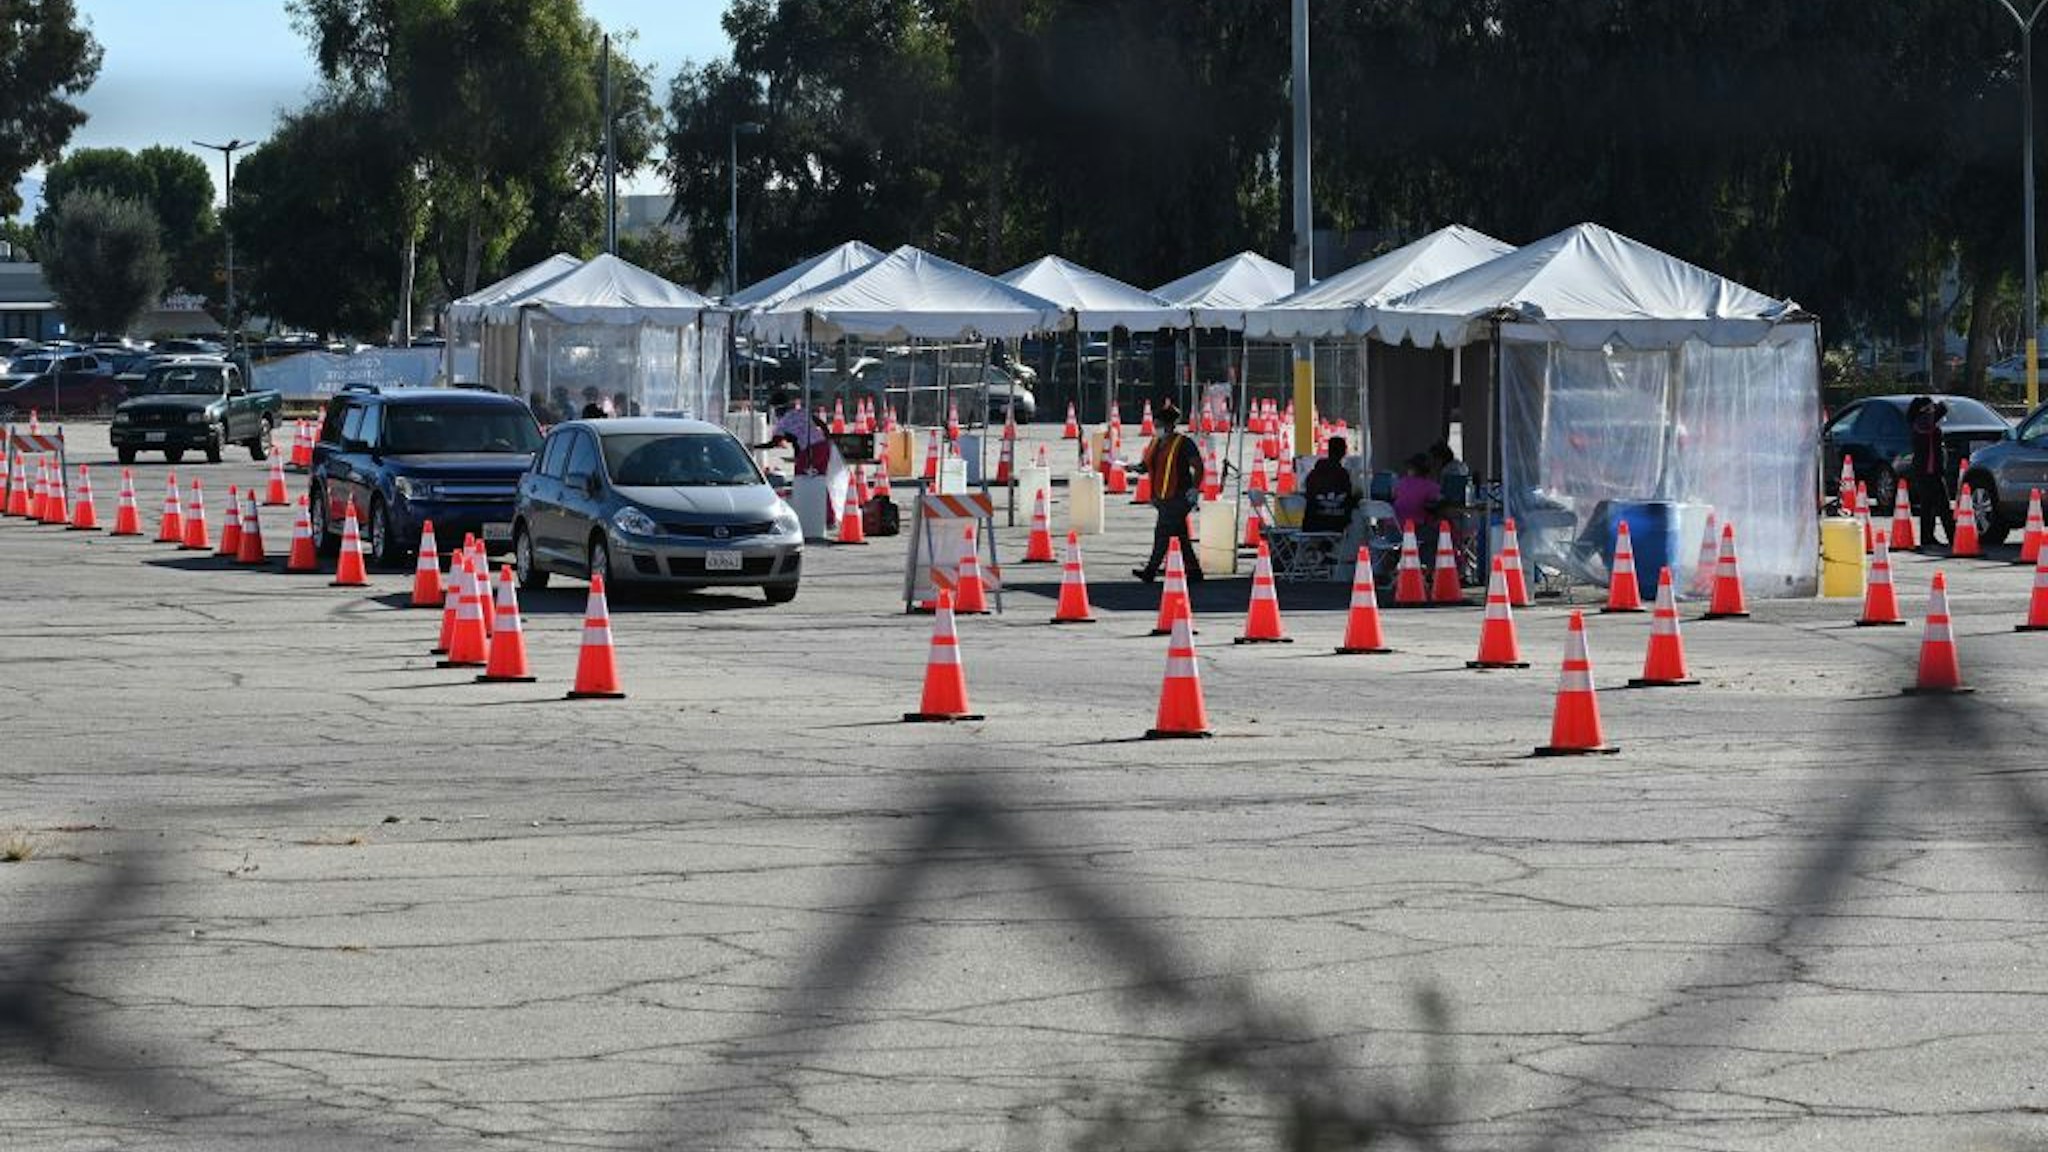 COVID-19 testing site staff directs traffic at a drive-up testing site in Los Angeles, California, November 17, 2020.